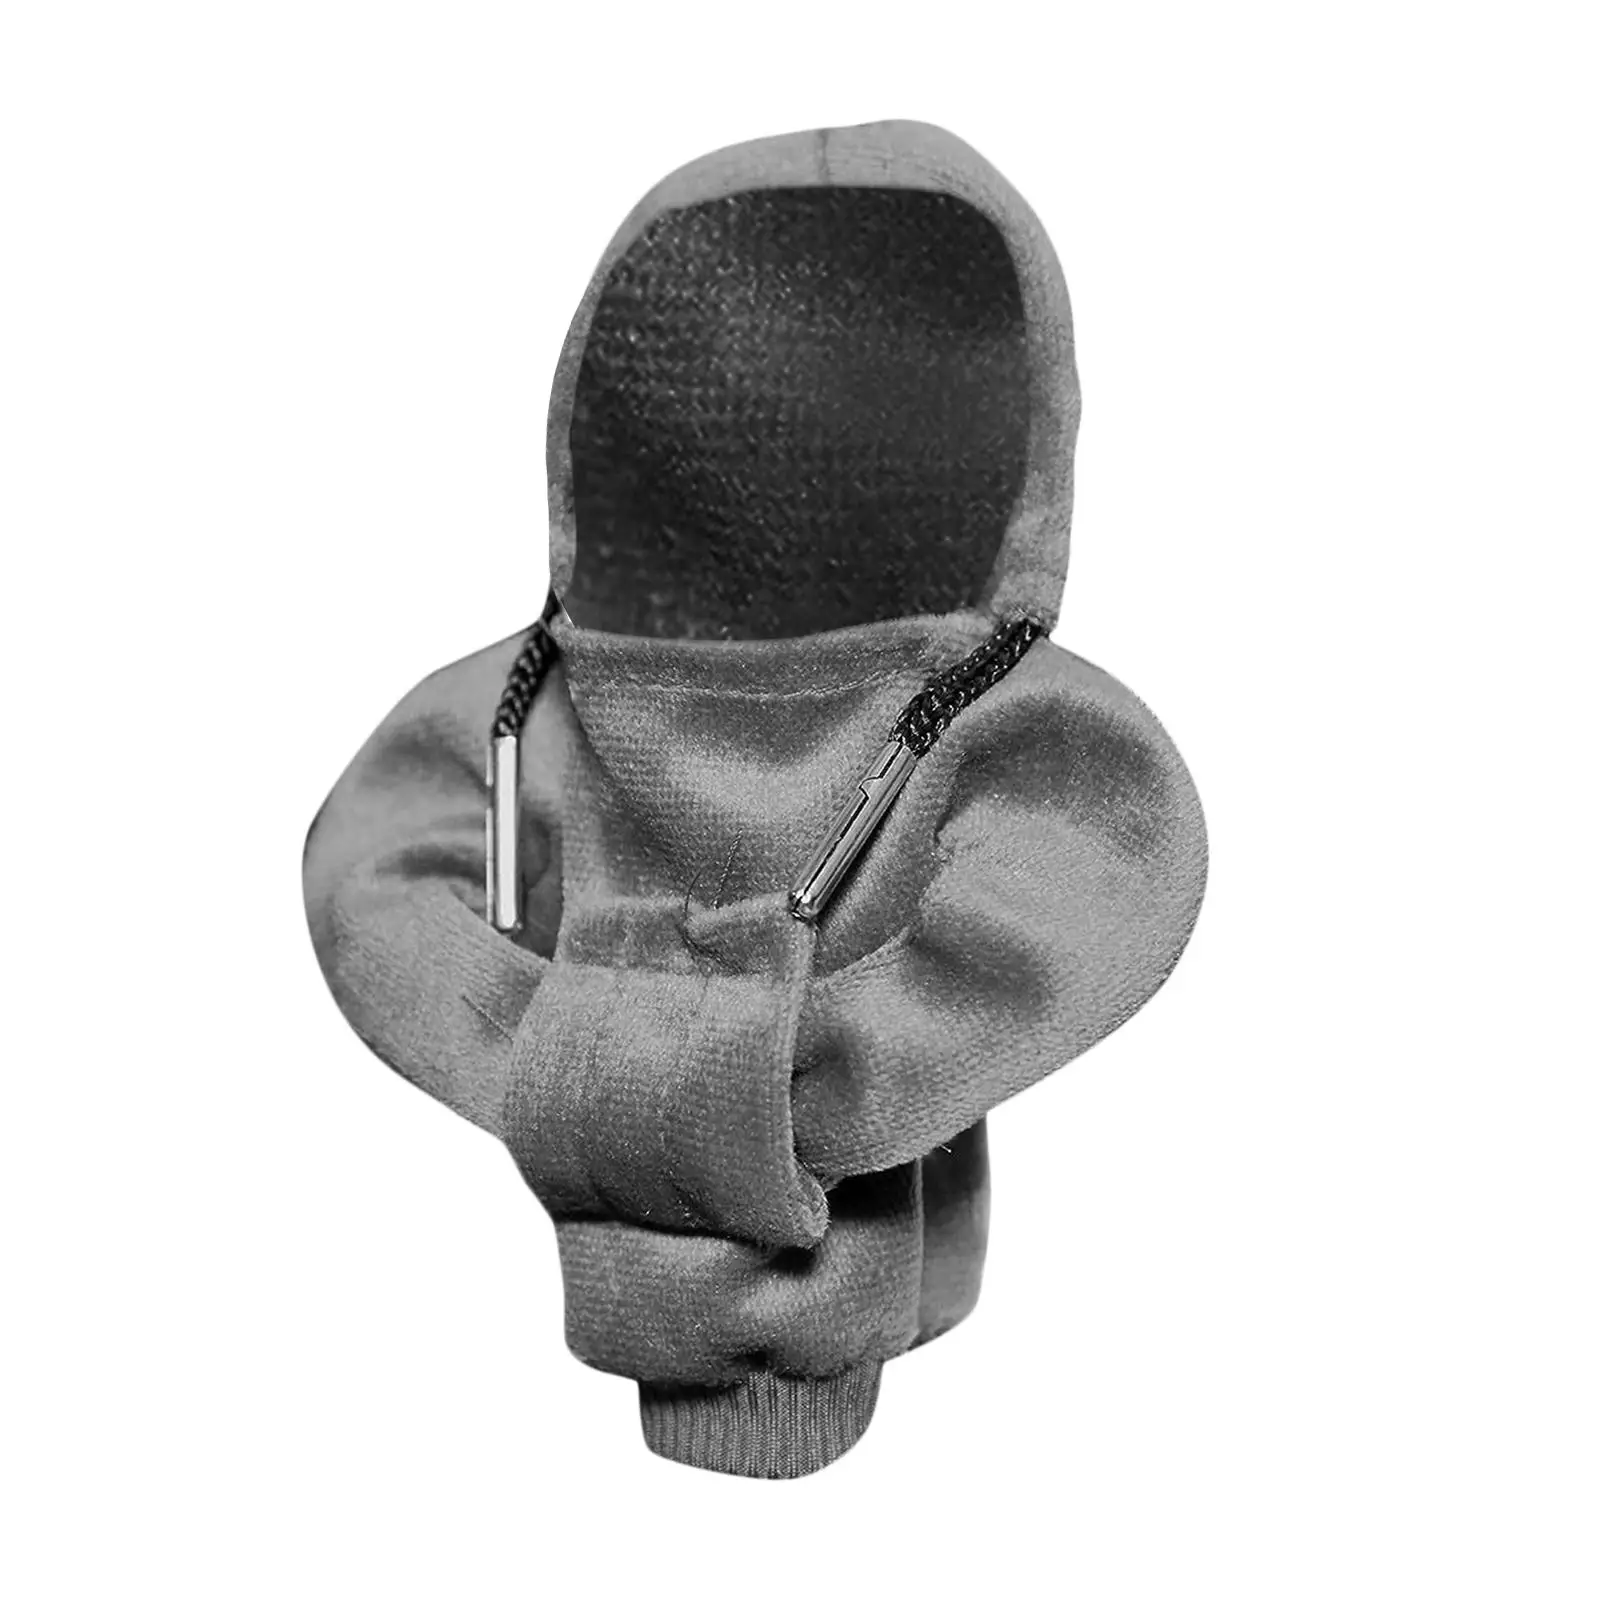 Gear Shifter Lever Knob Cover Funny Hoodie Decoration Interesting Shifter Knob Hoodie Cover Sleeve Knob Gear Stick Protector